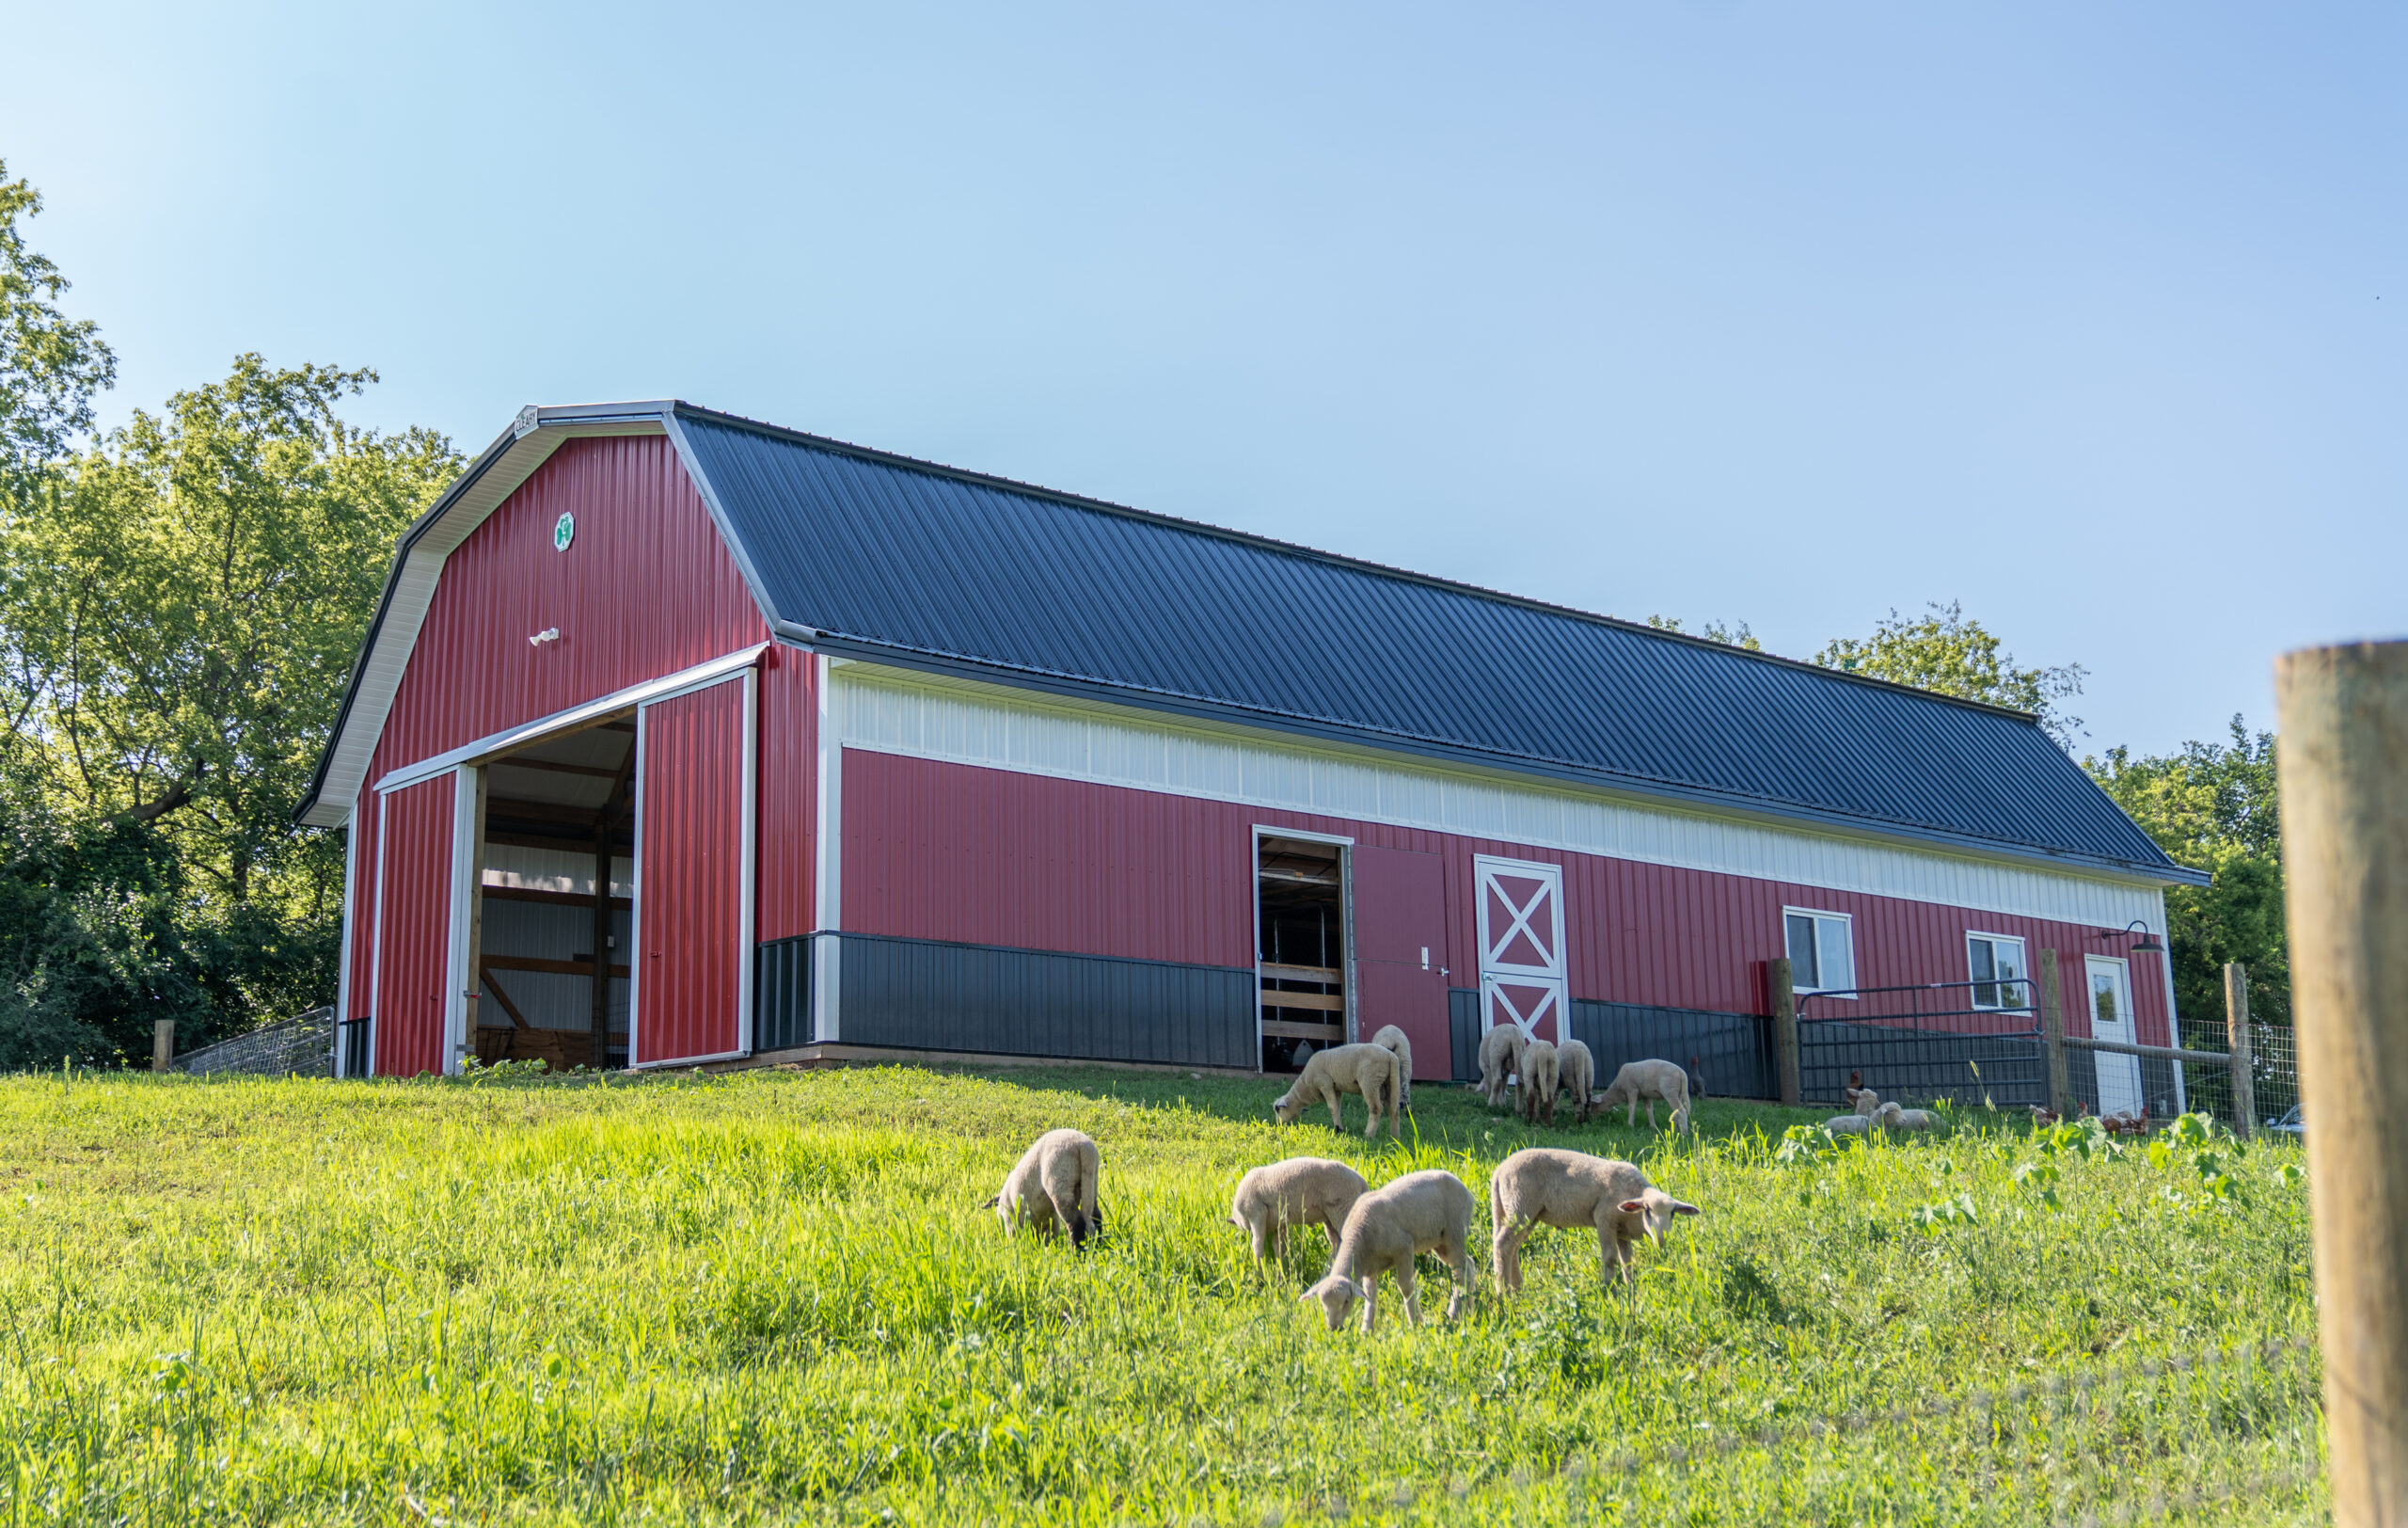 Red barn with doors open. Sheep grazing in a field in front.